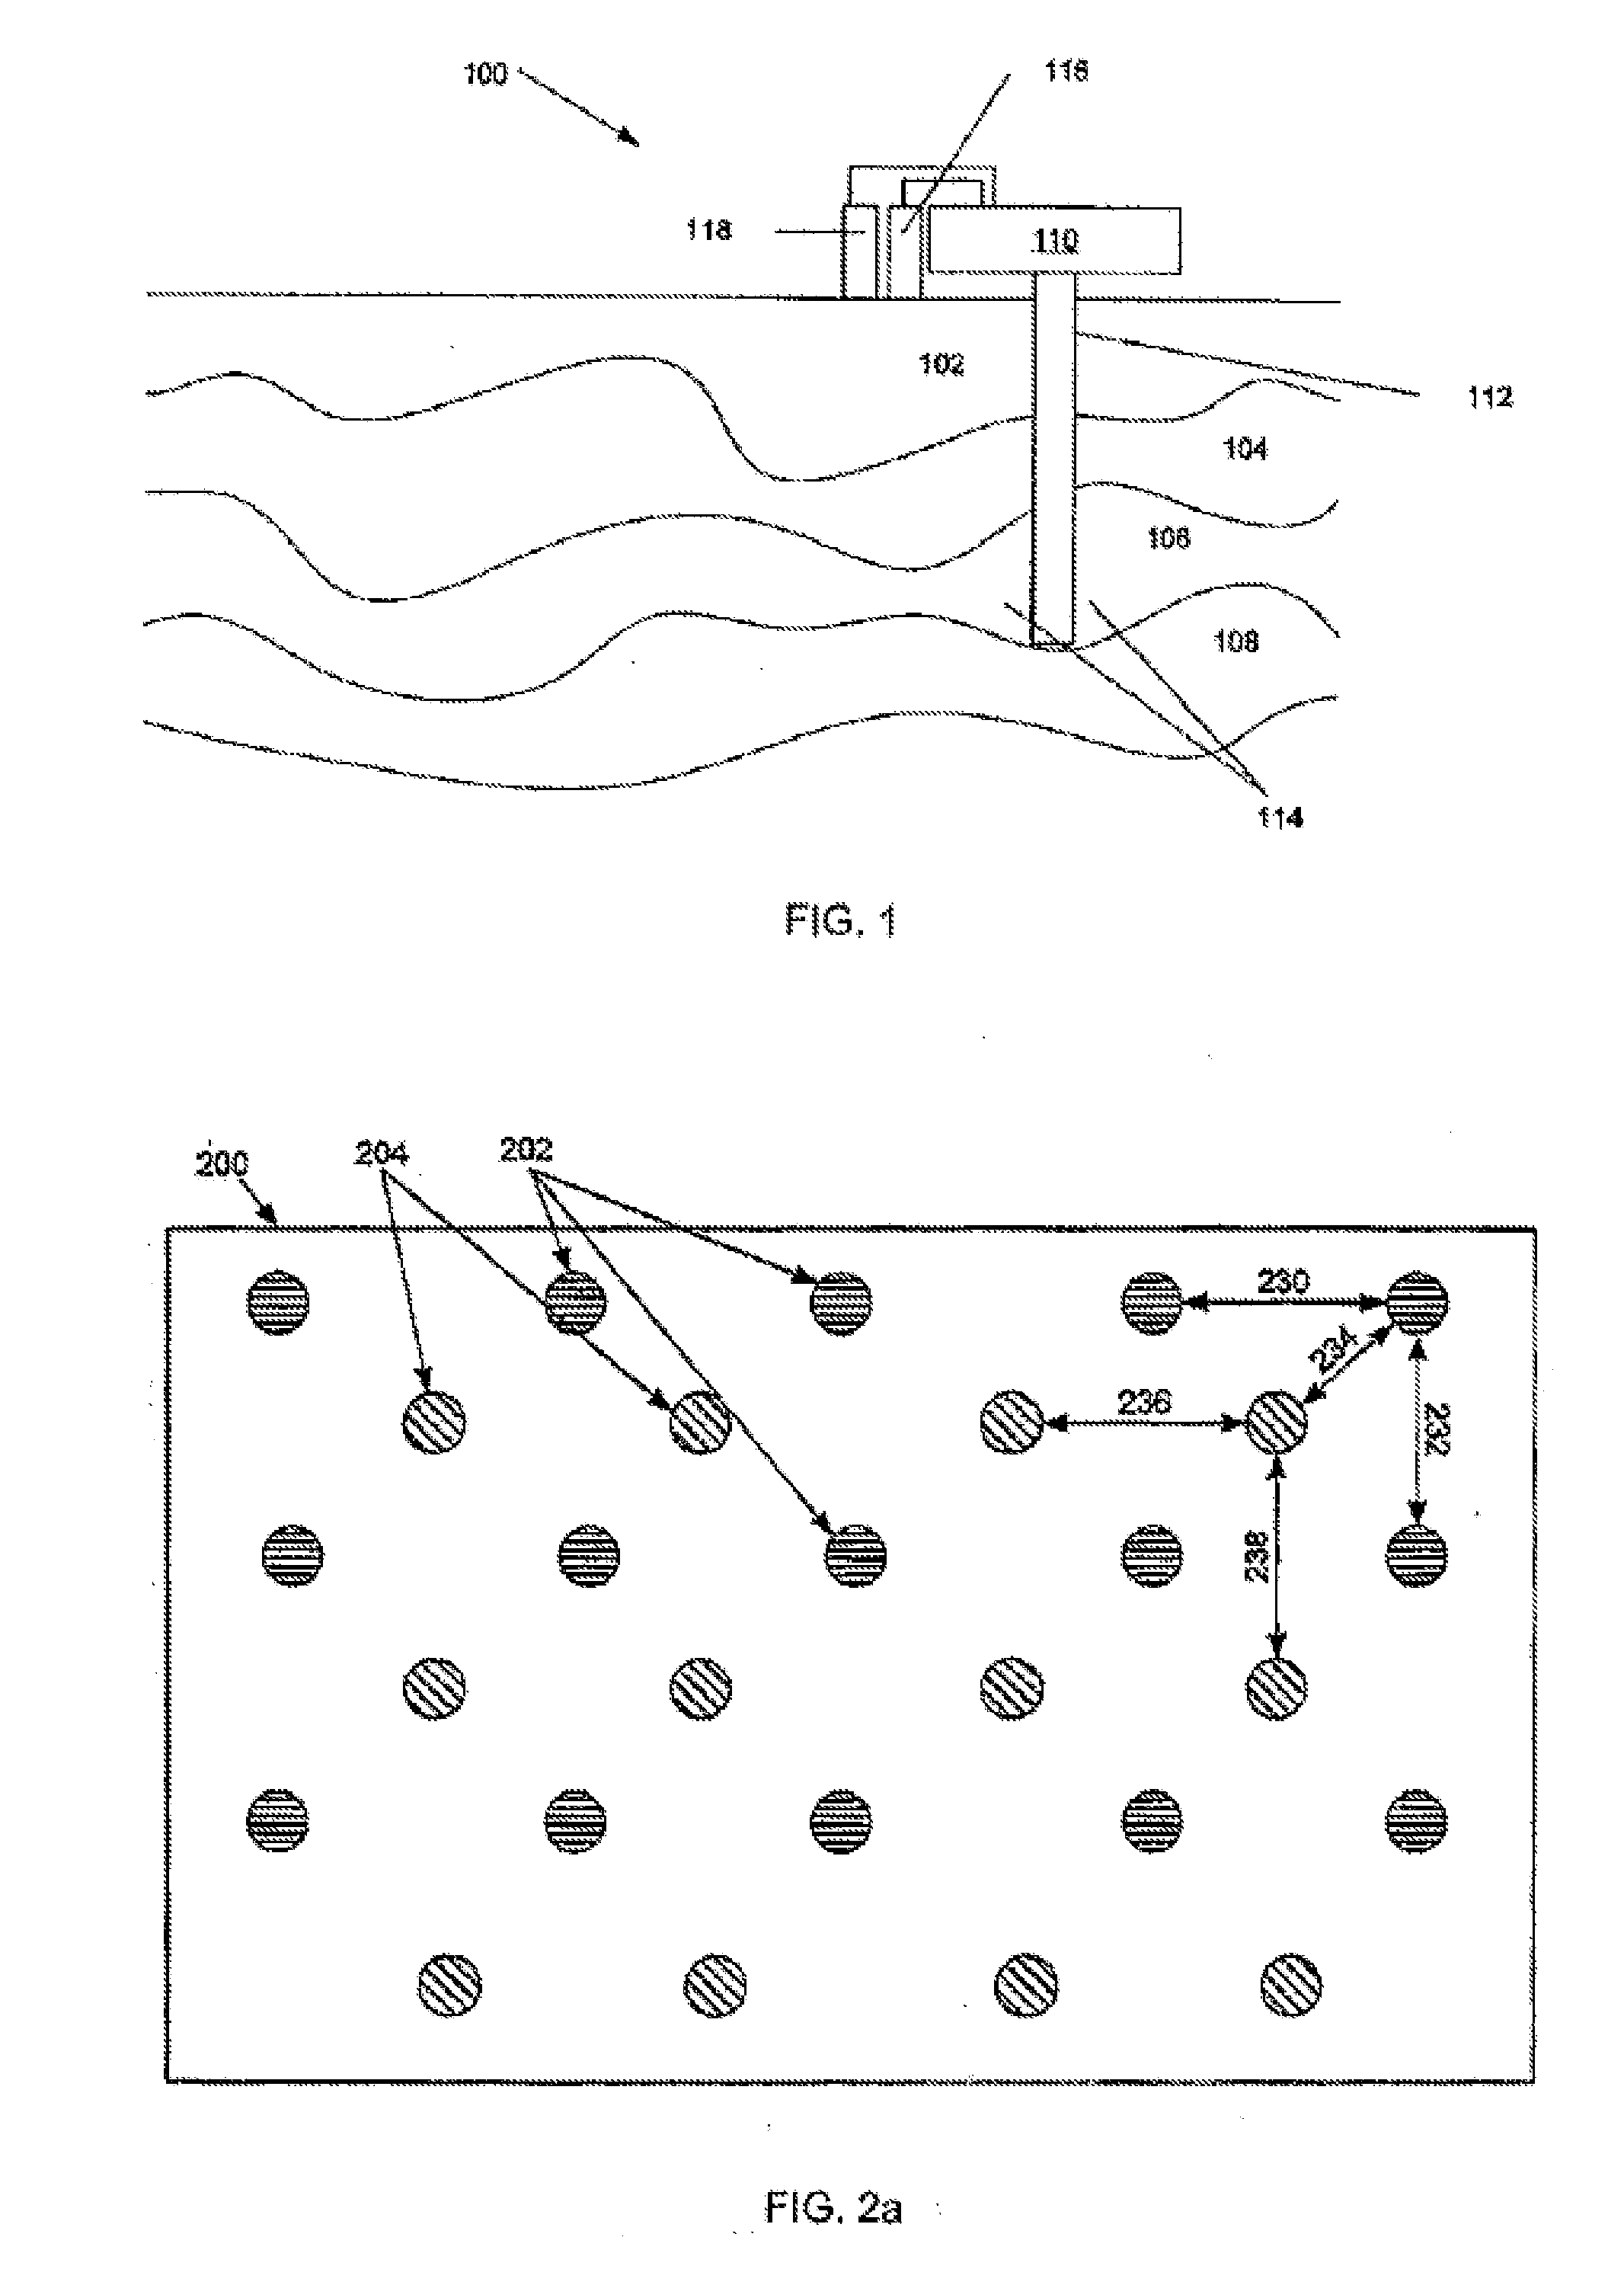 Method for producing oil